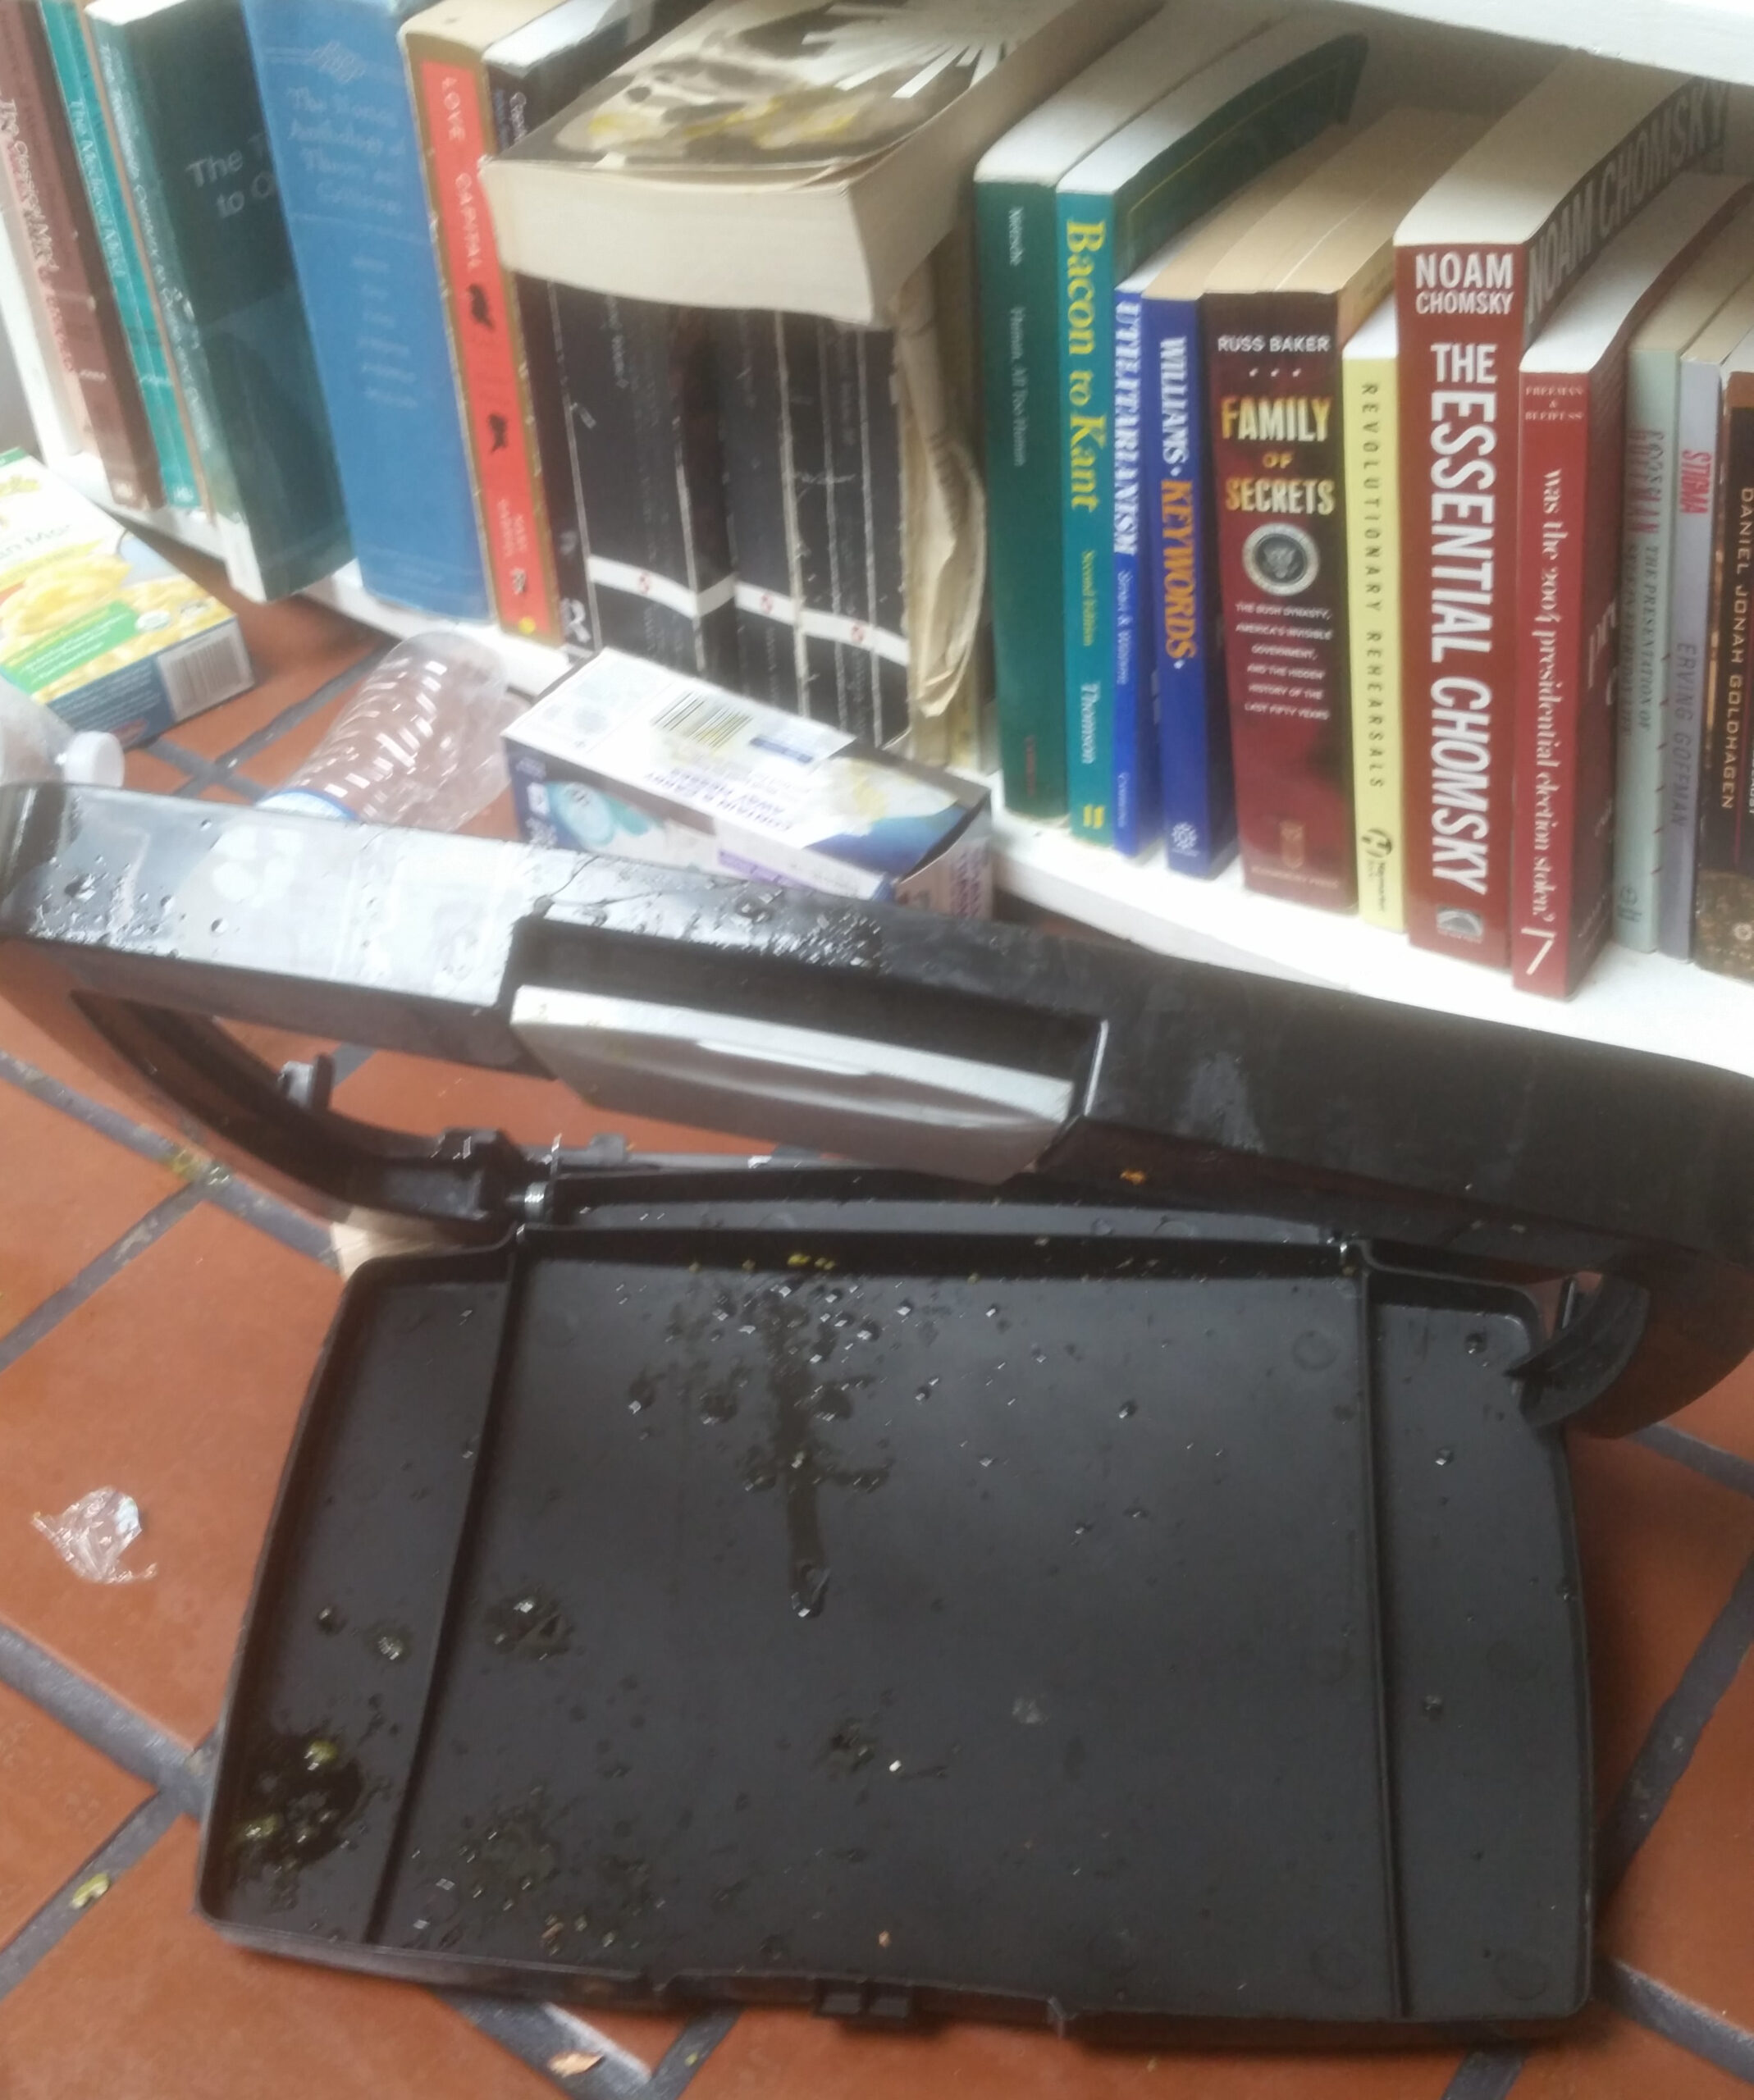 Broken trash can lid, covered in olive oil, in front of a bookcase in my kitchen